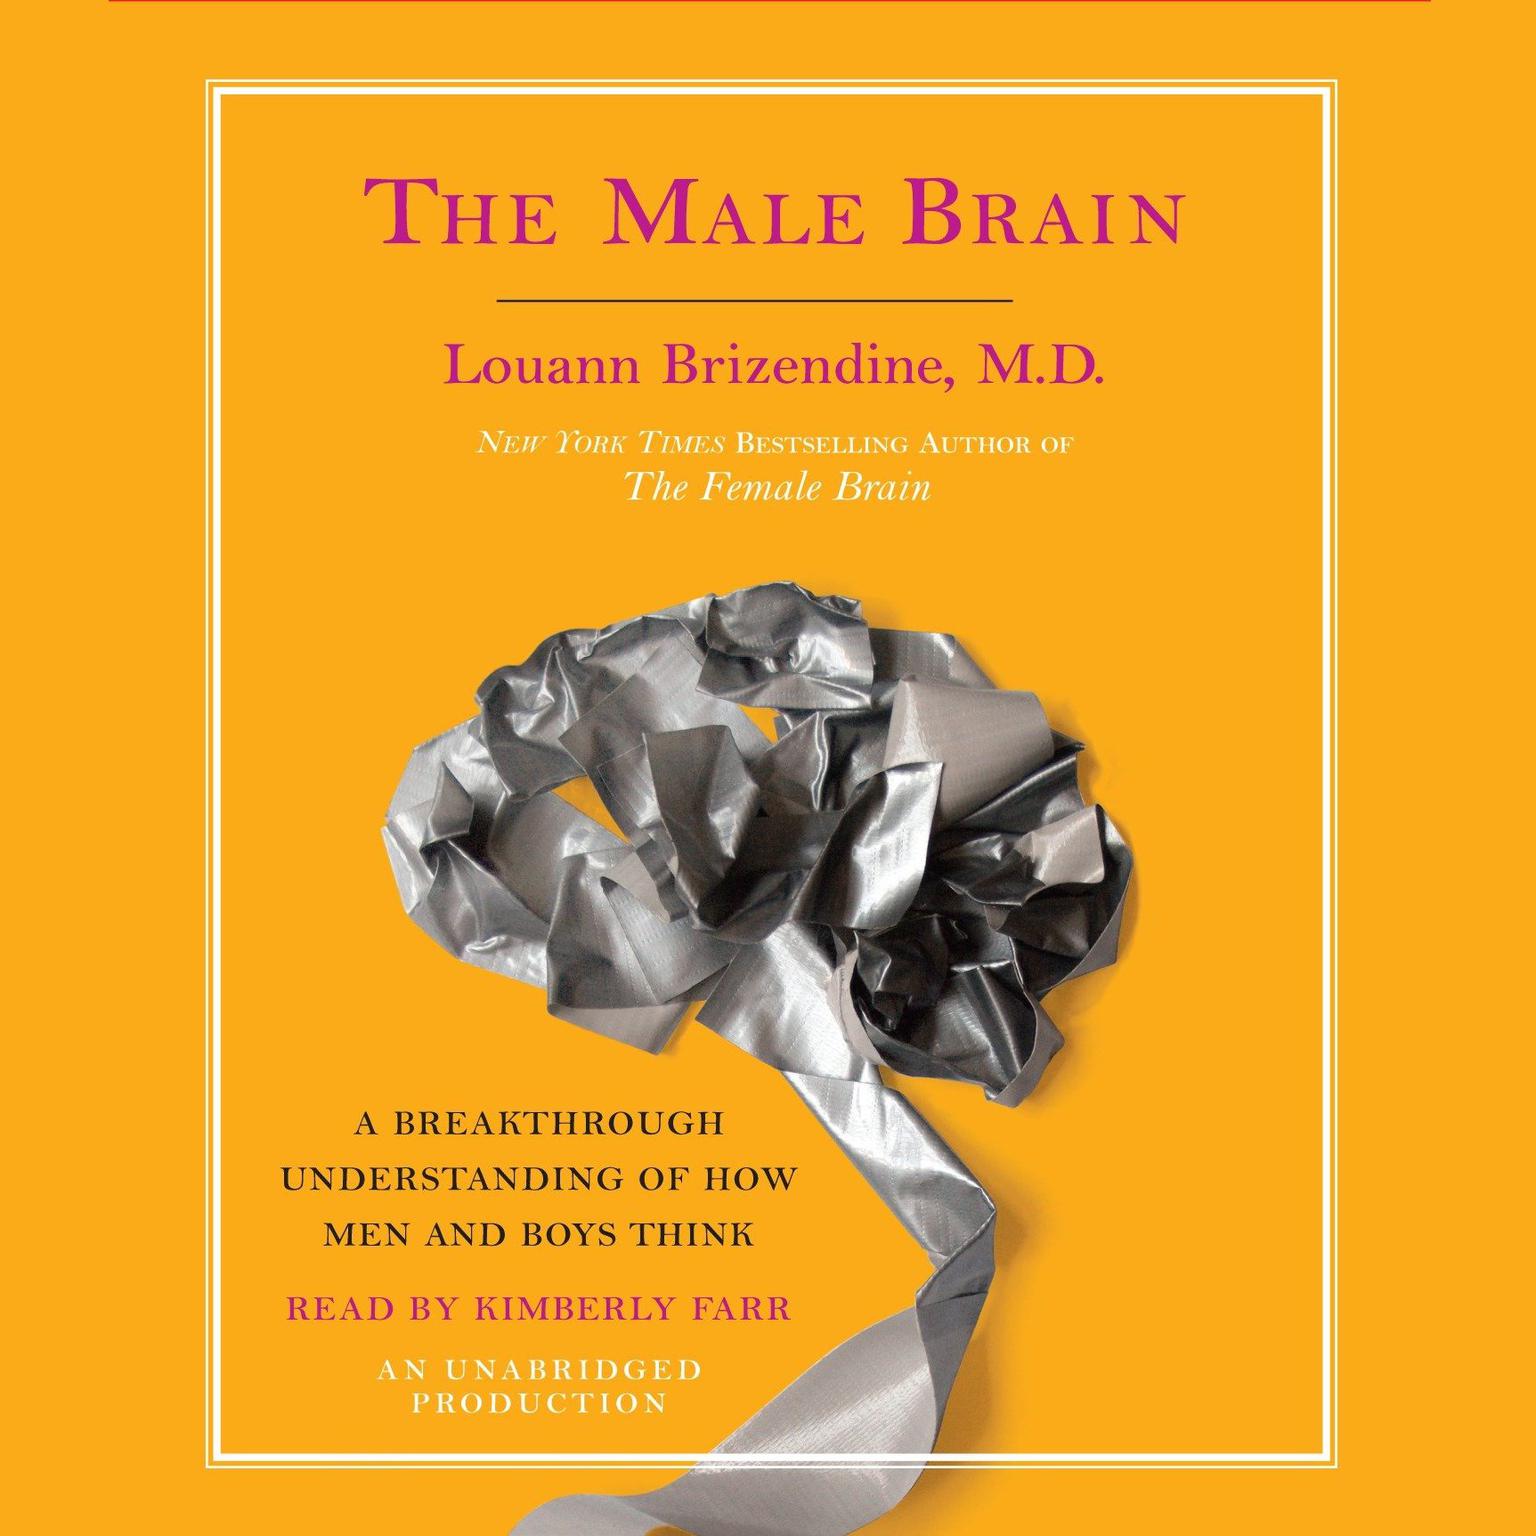 The Male Brain: A Breakthrough Understanding of How Men and Boys Think Audiobook, by Louann Brizendine